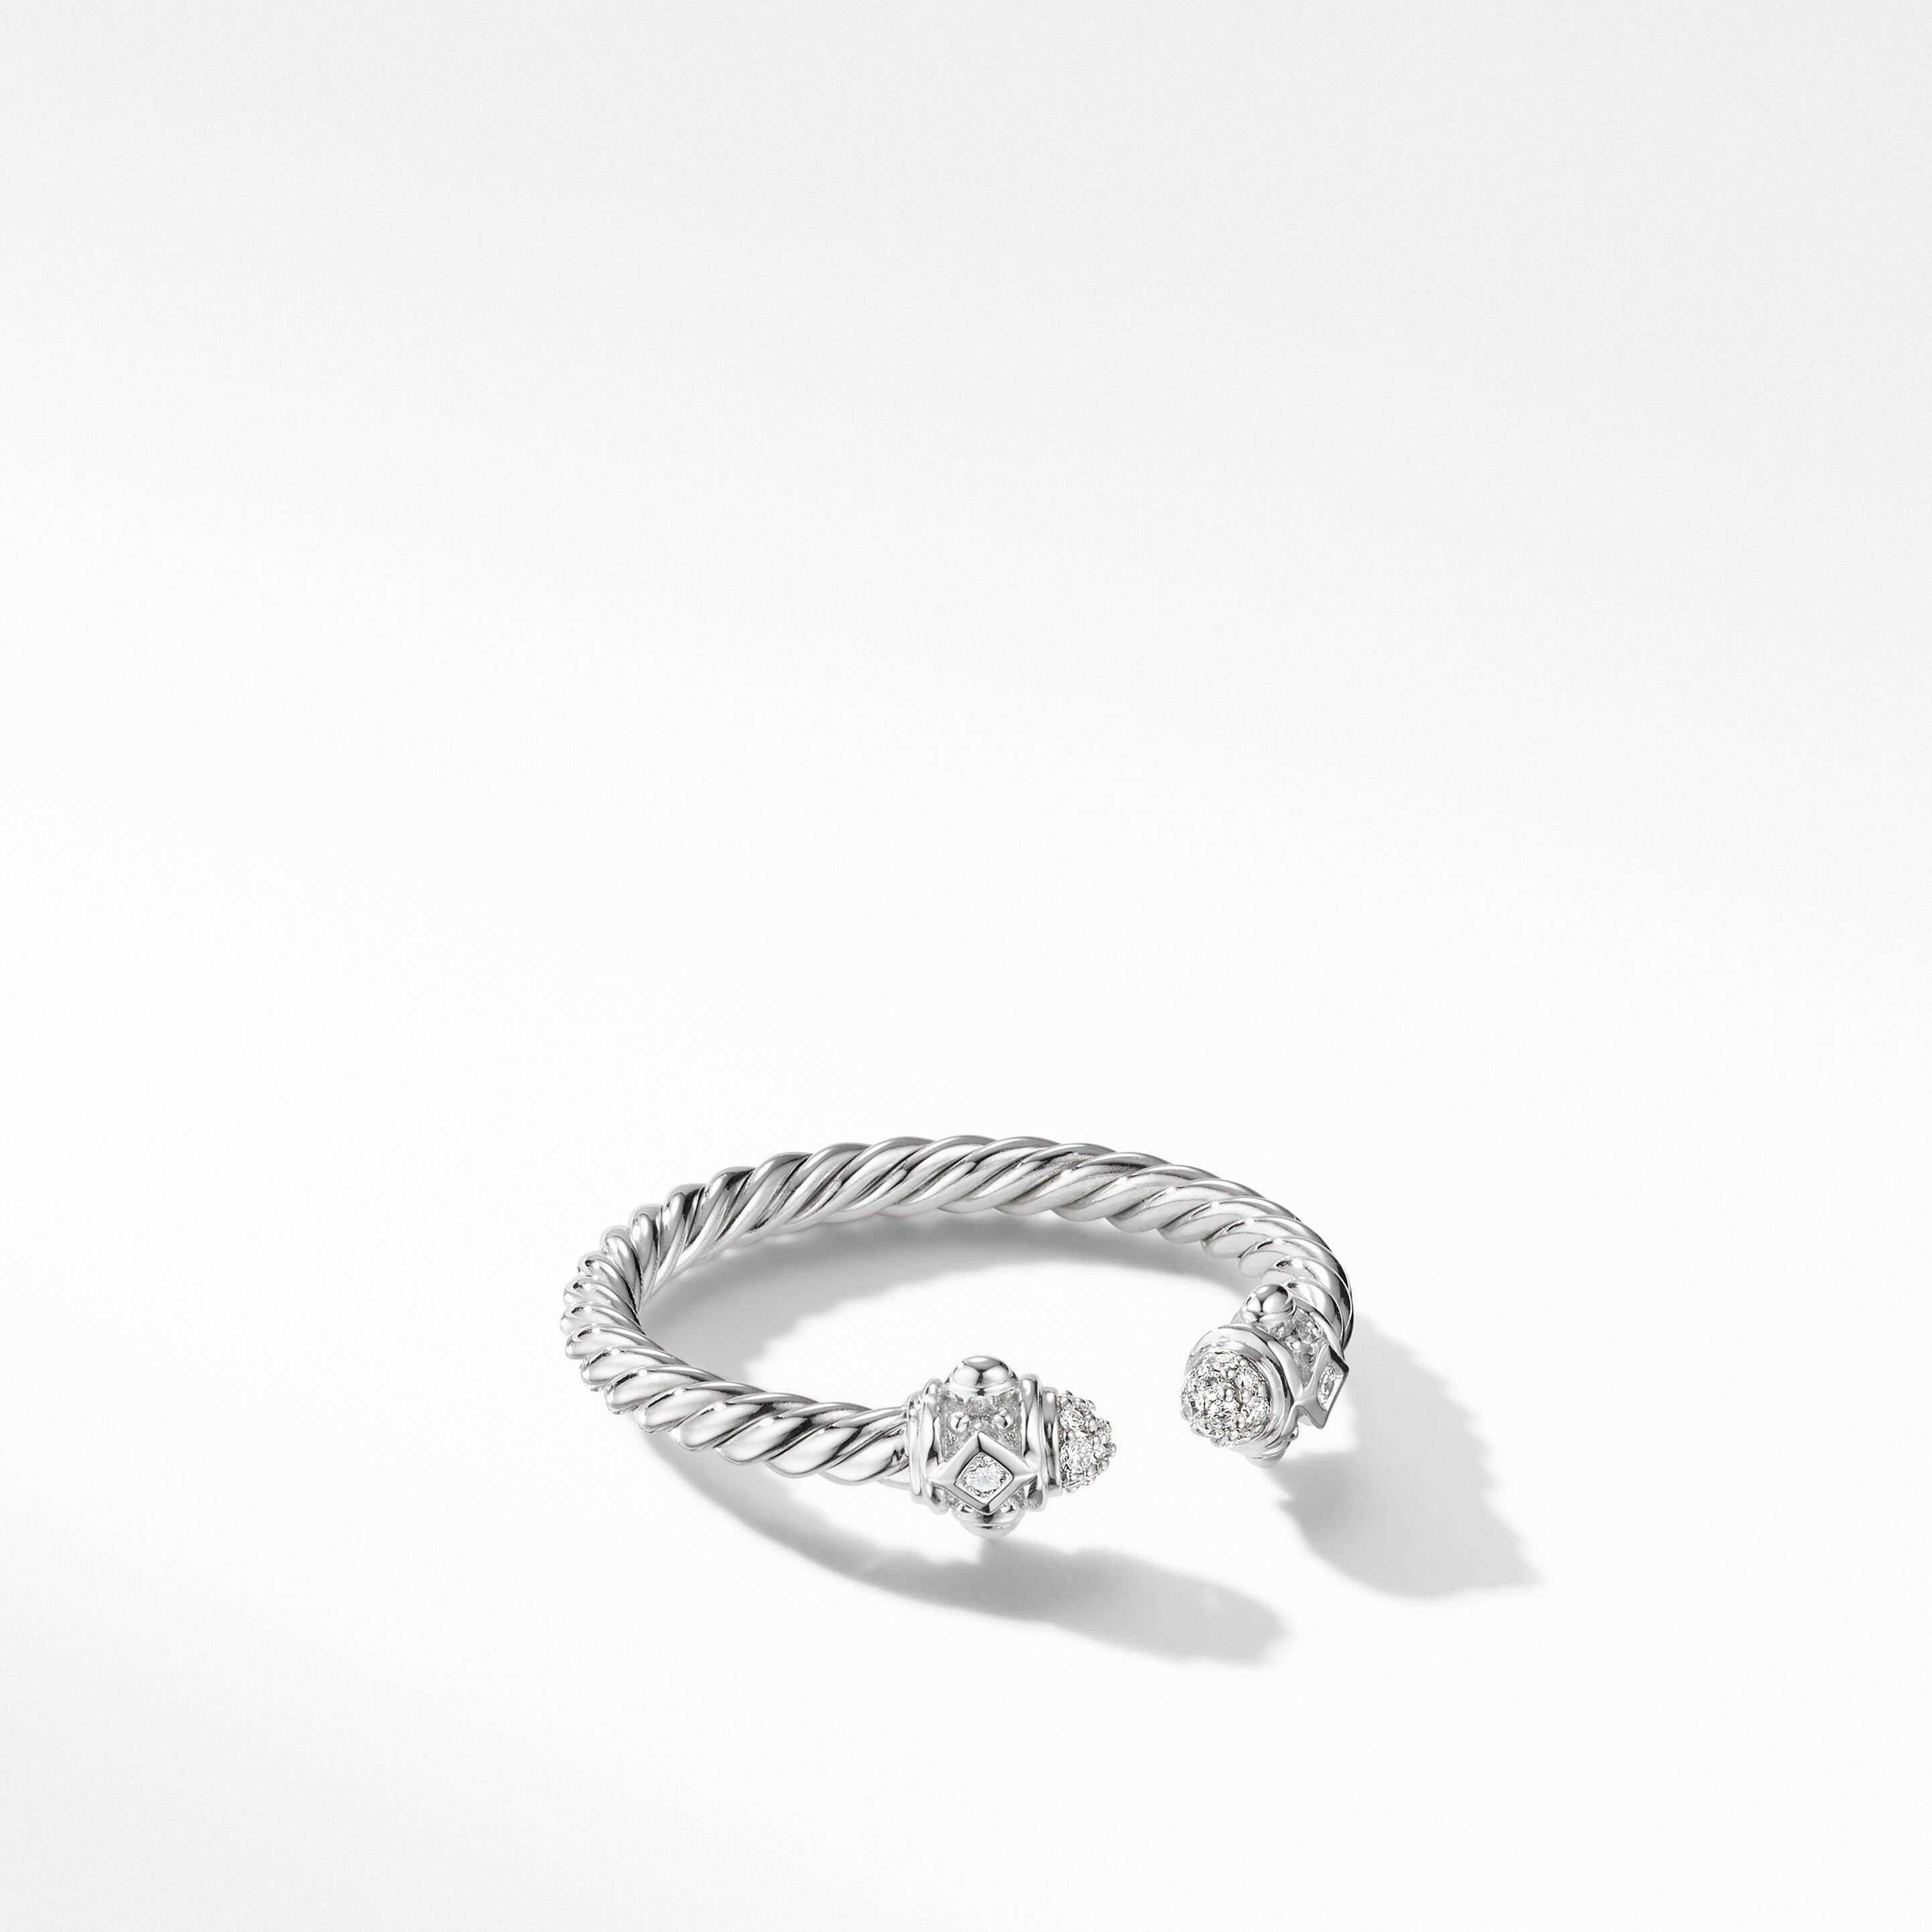 Renaissance Ring in 18K White Gold with Pavé Diamonds